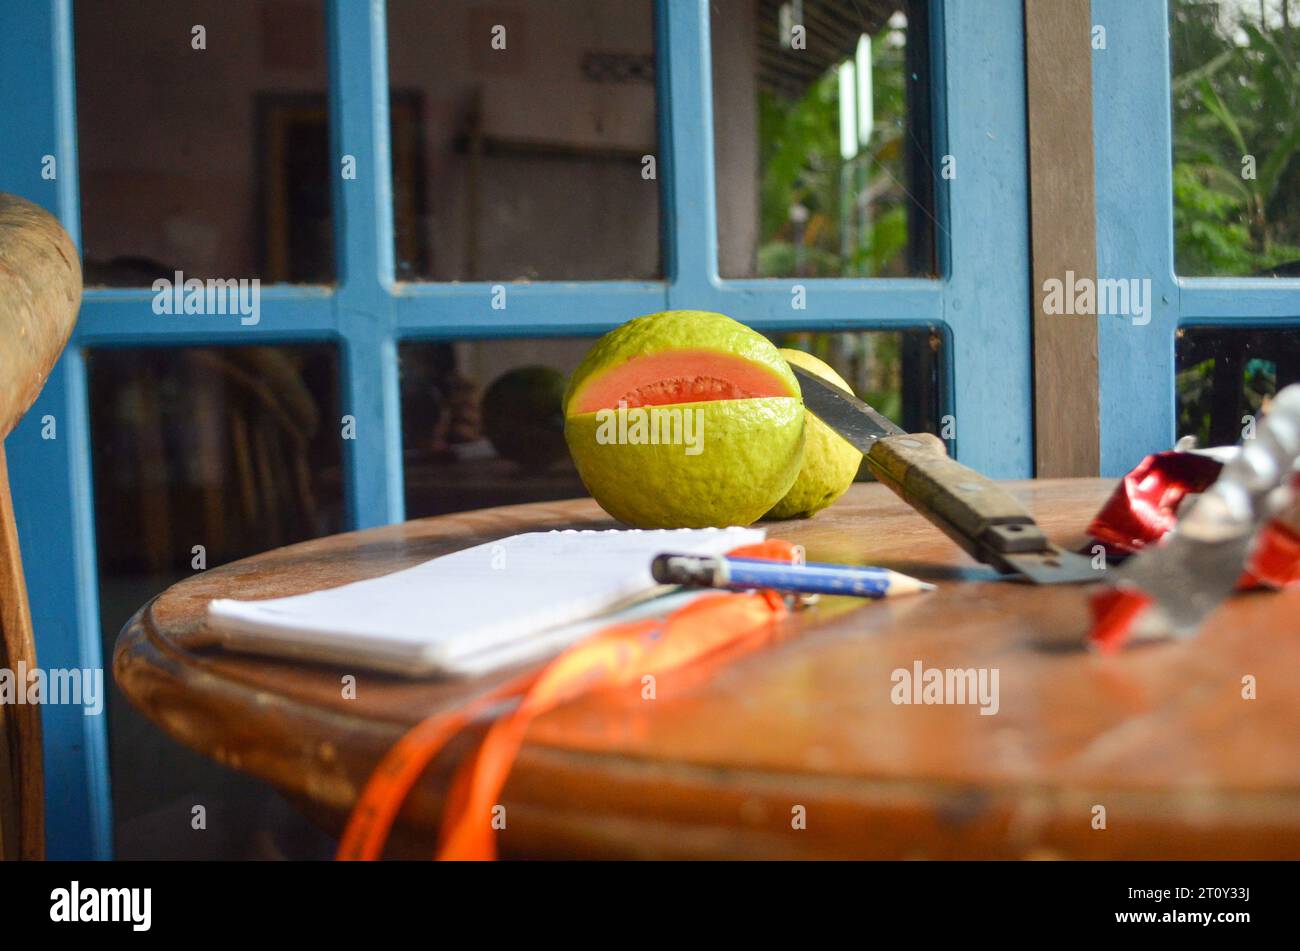 Photograph of several objects such as guava, pencil, knife, notebook on a wooden table,Indonesia Stock Photo